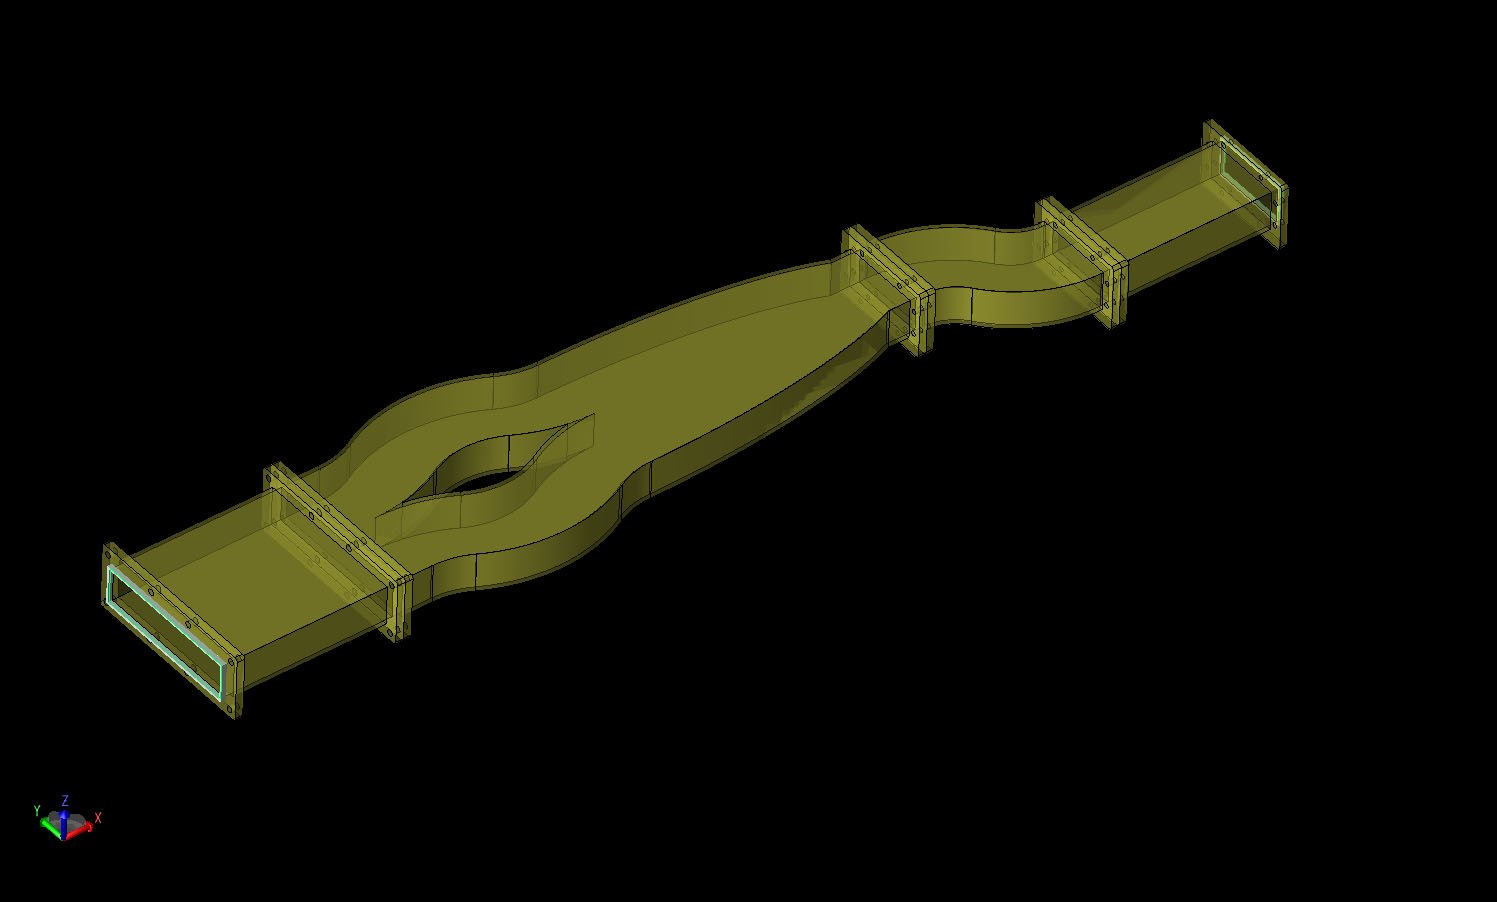 Figure 10CAD geometry for the multi-mode converter shown in an angled view.